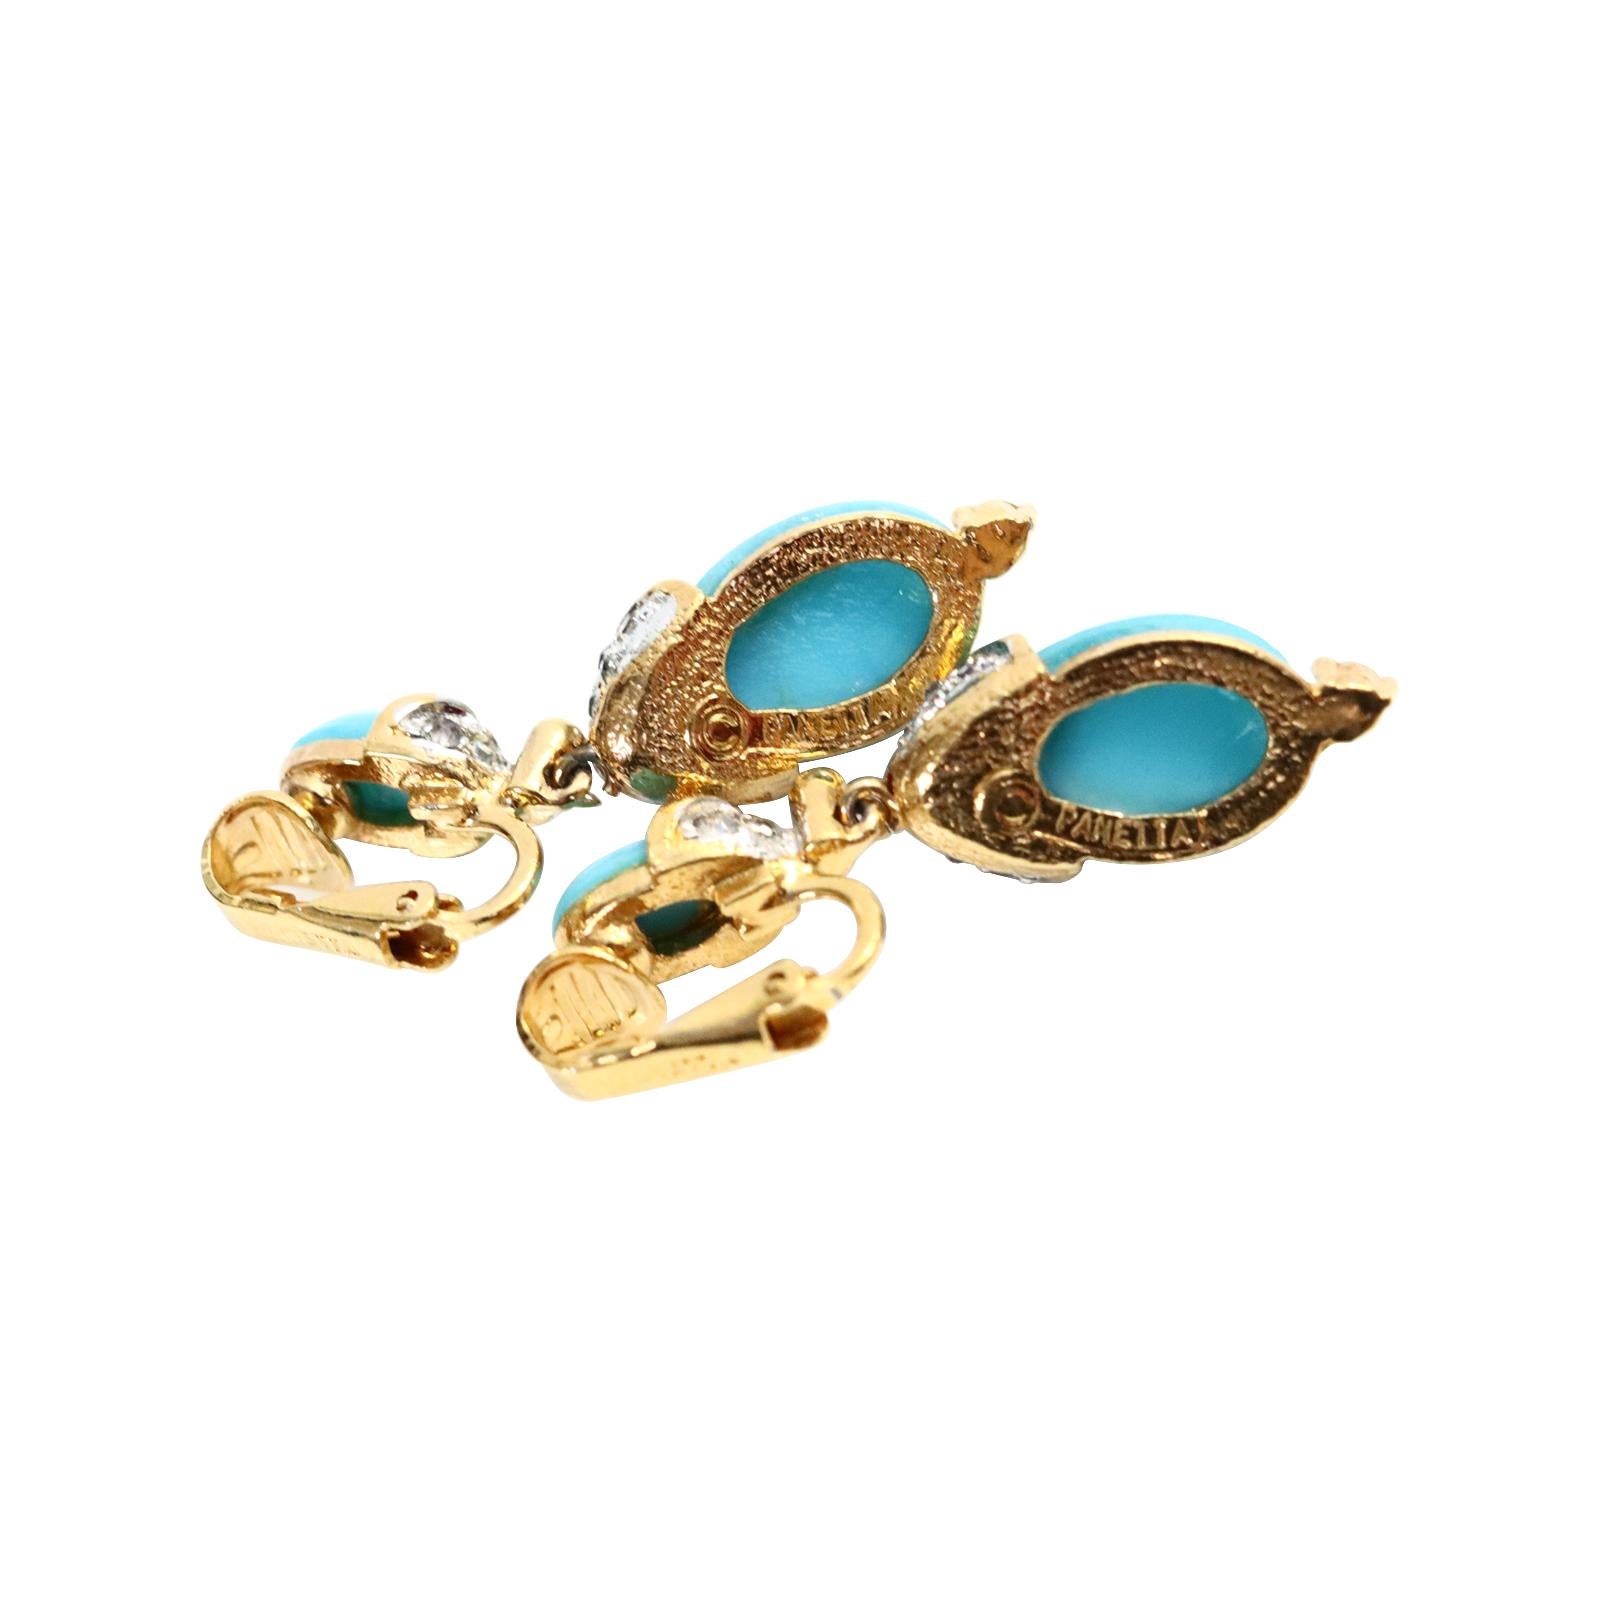 Vintage Panetta Faux Turquoise Dangling Earrings Circa 1980s In Good Condition For Sale In New York, NY